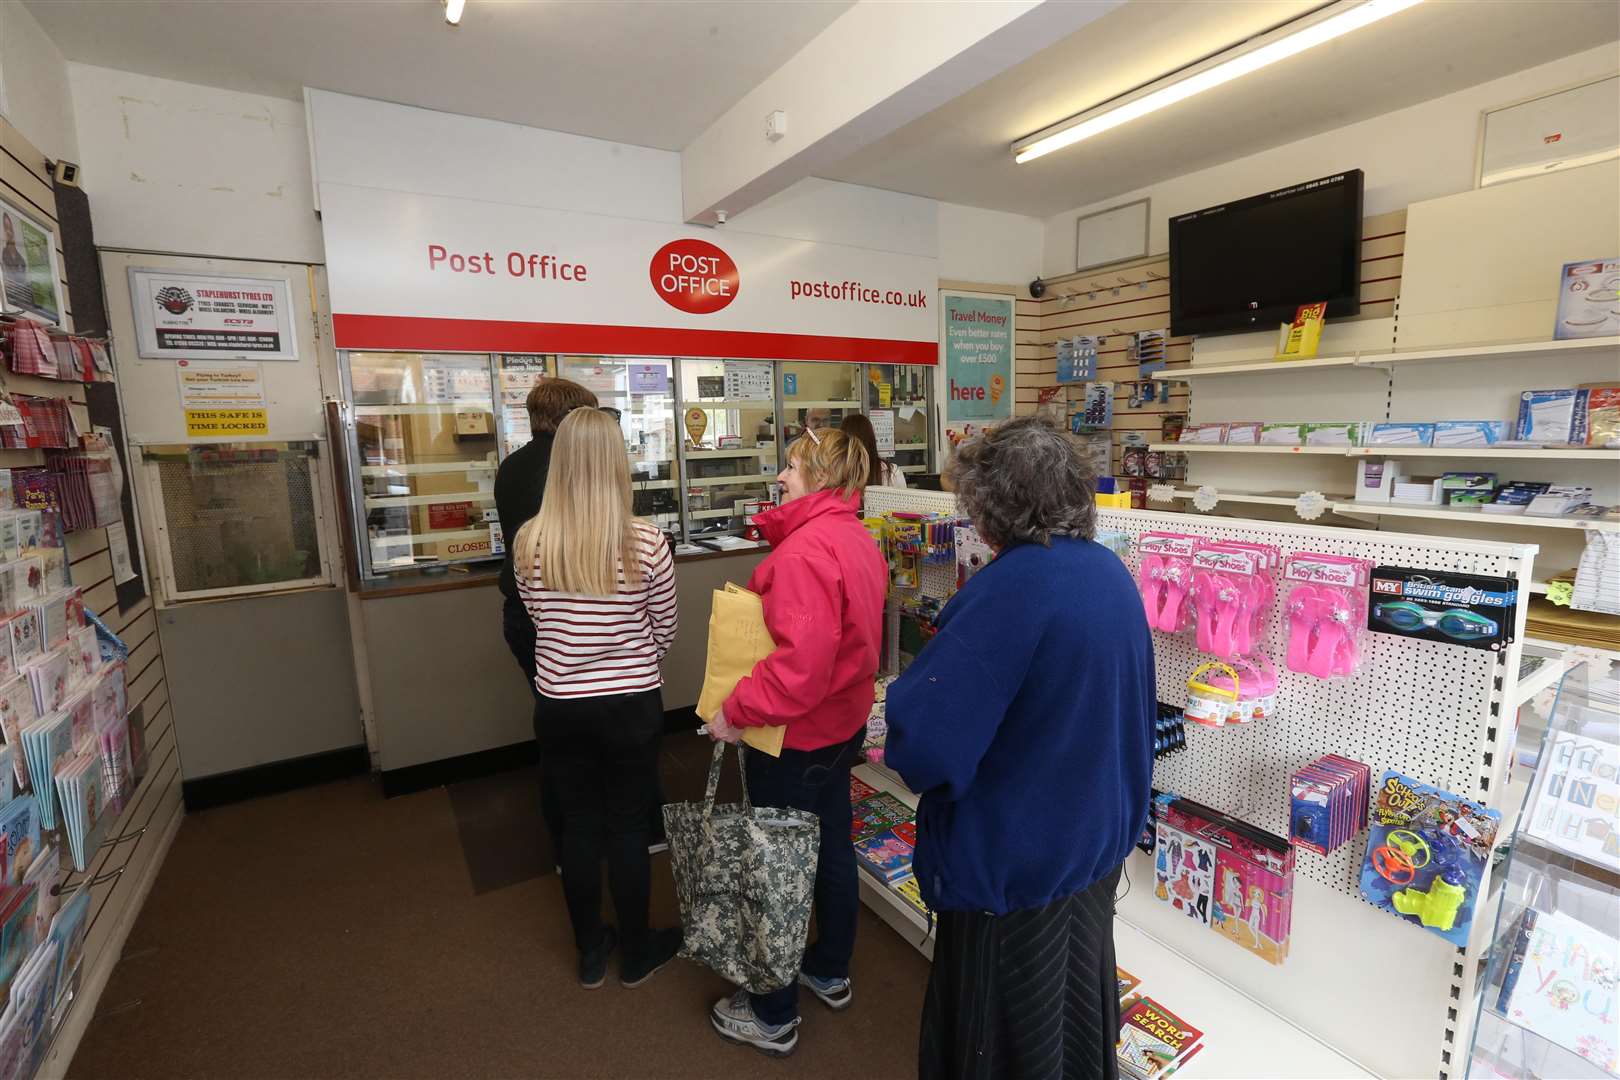 Customers had to find alternatives when the Maidstone store closed due to staff shortages